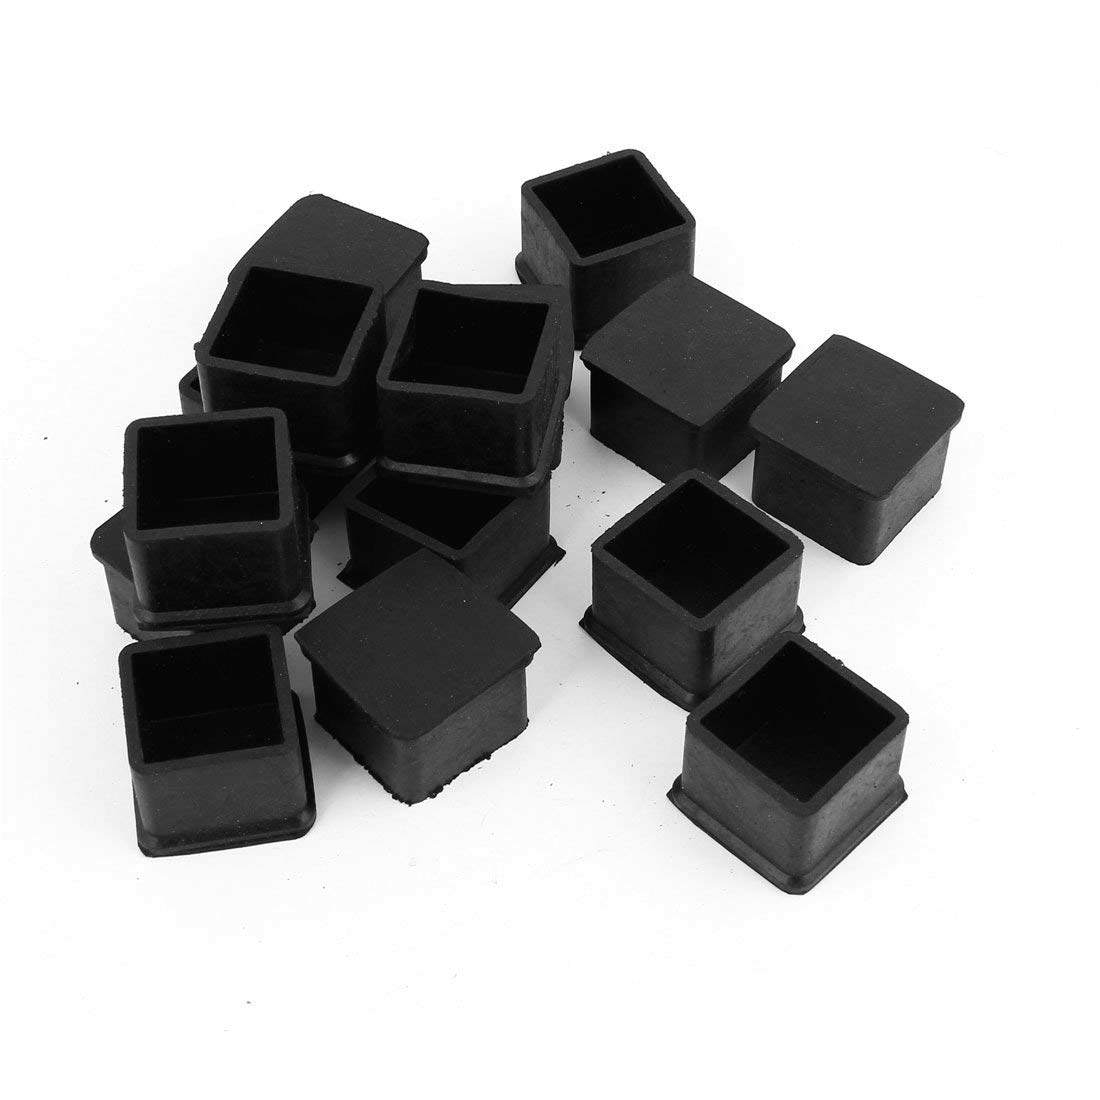 5pcs Black Rubber 60mmx60mm Square Chair Foot Cover Protector